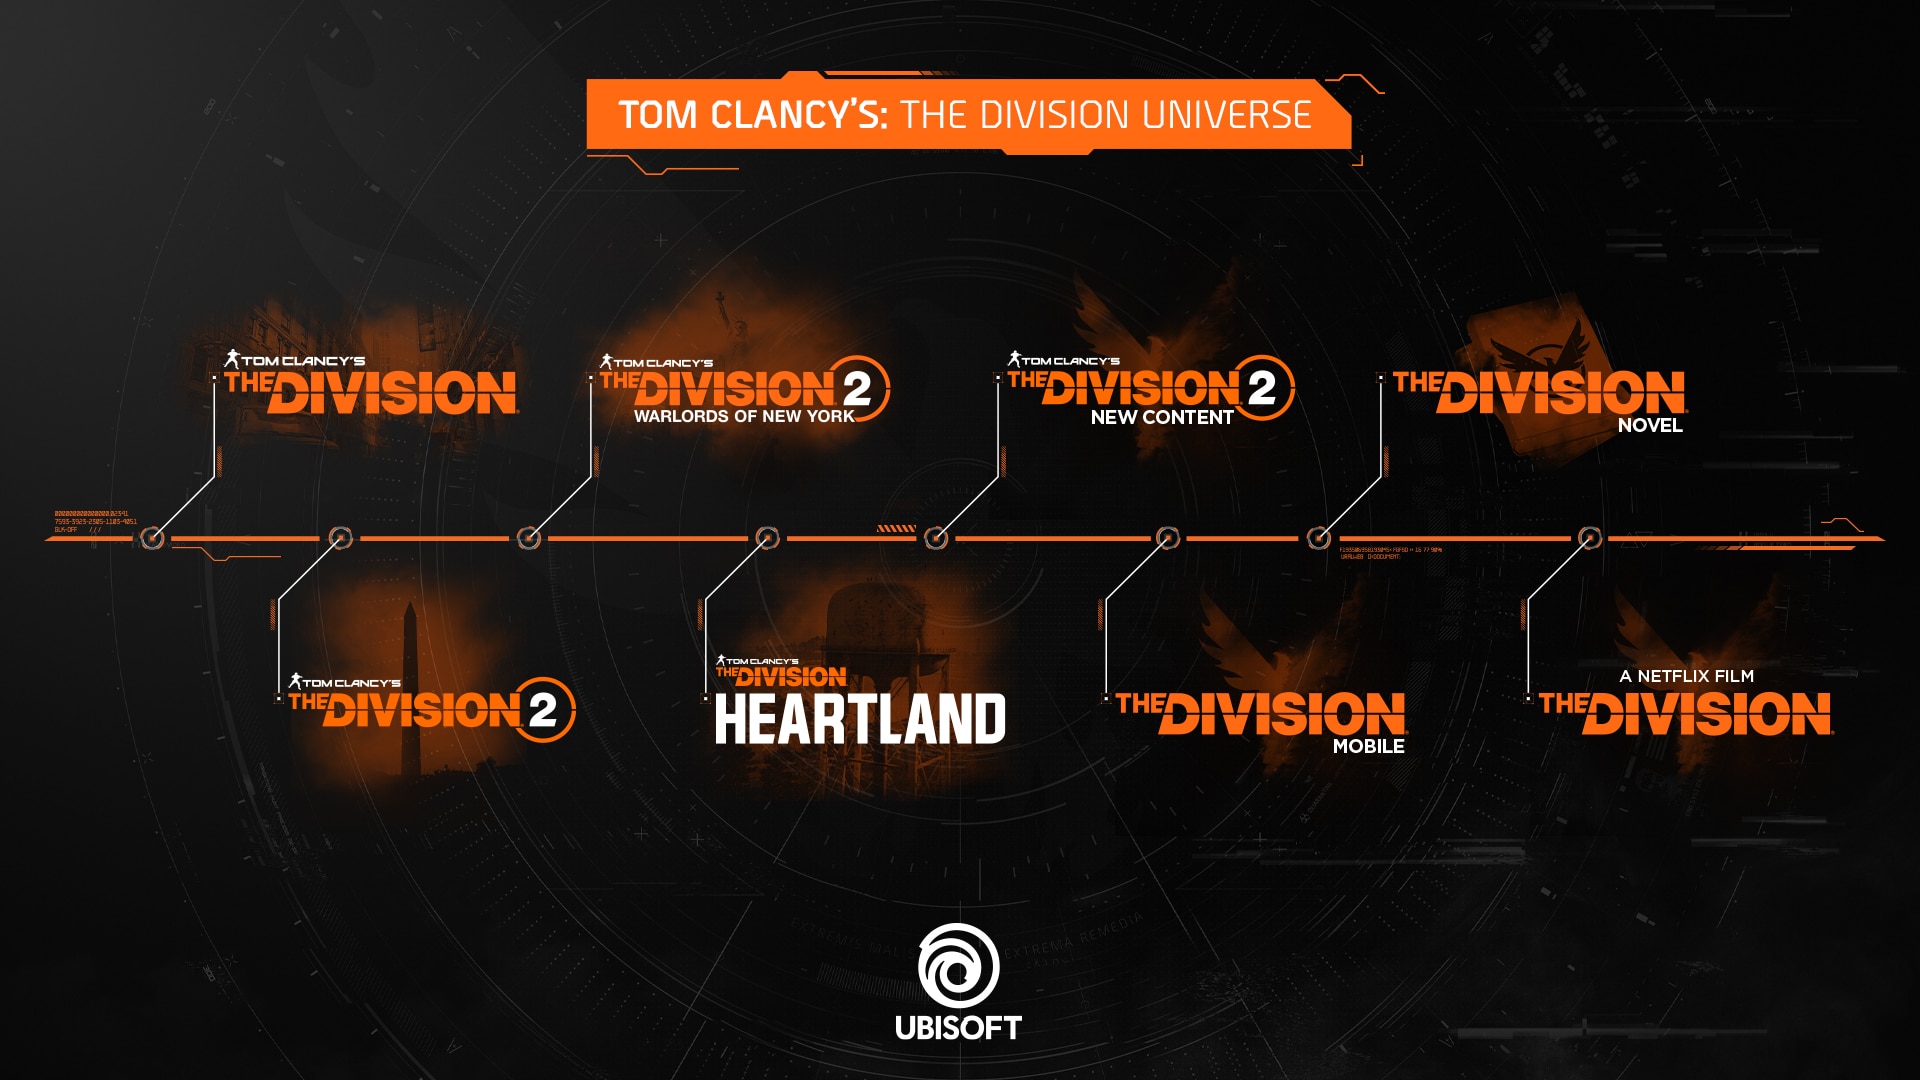 [UN] [News] An Update on the Tom Clancy’s The Division Universe